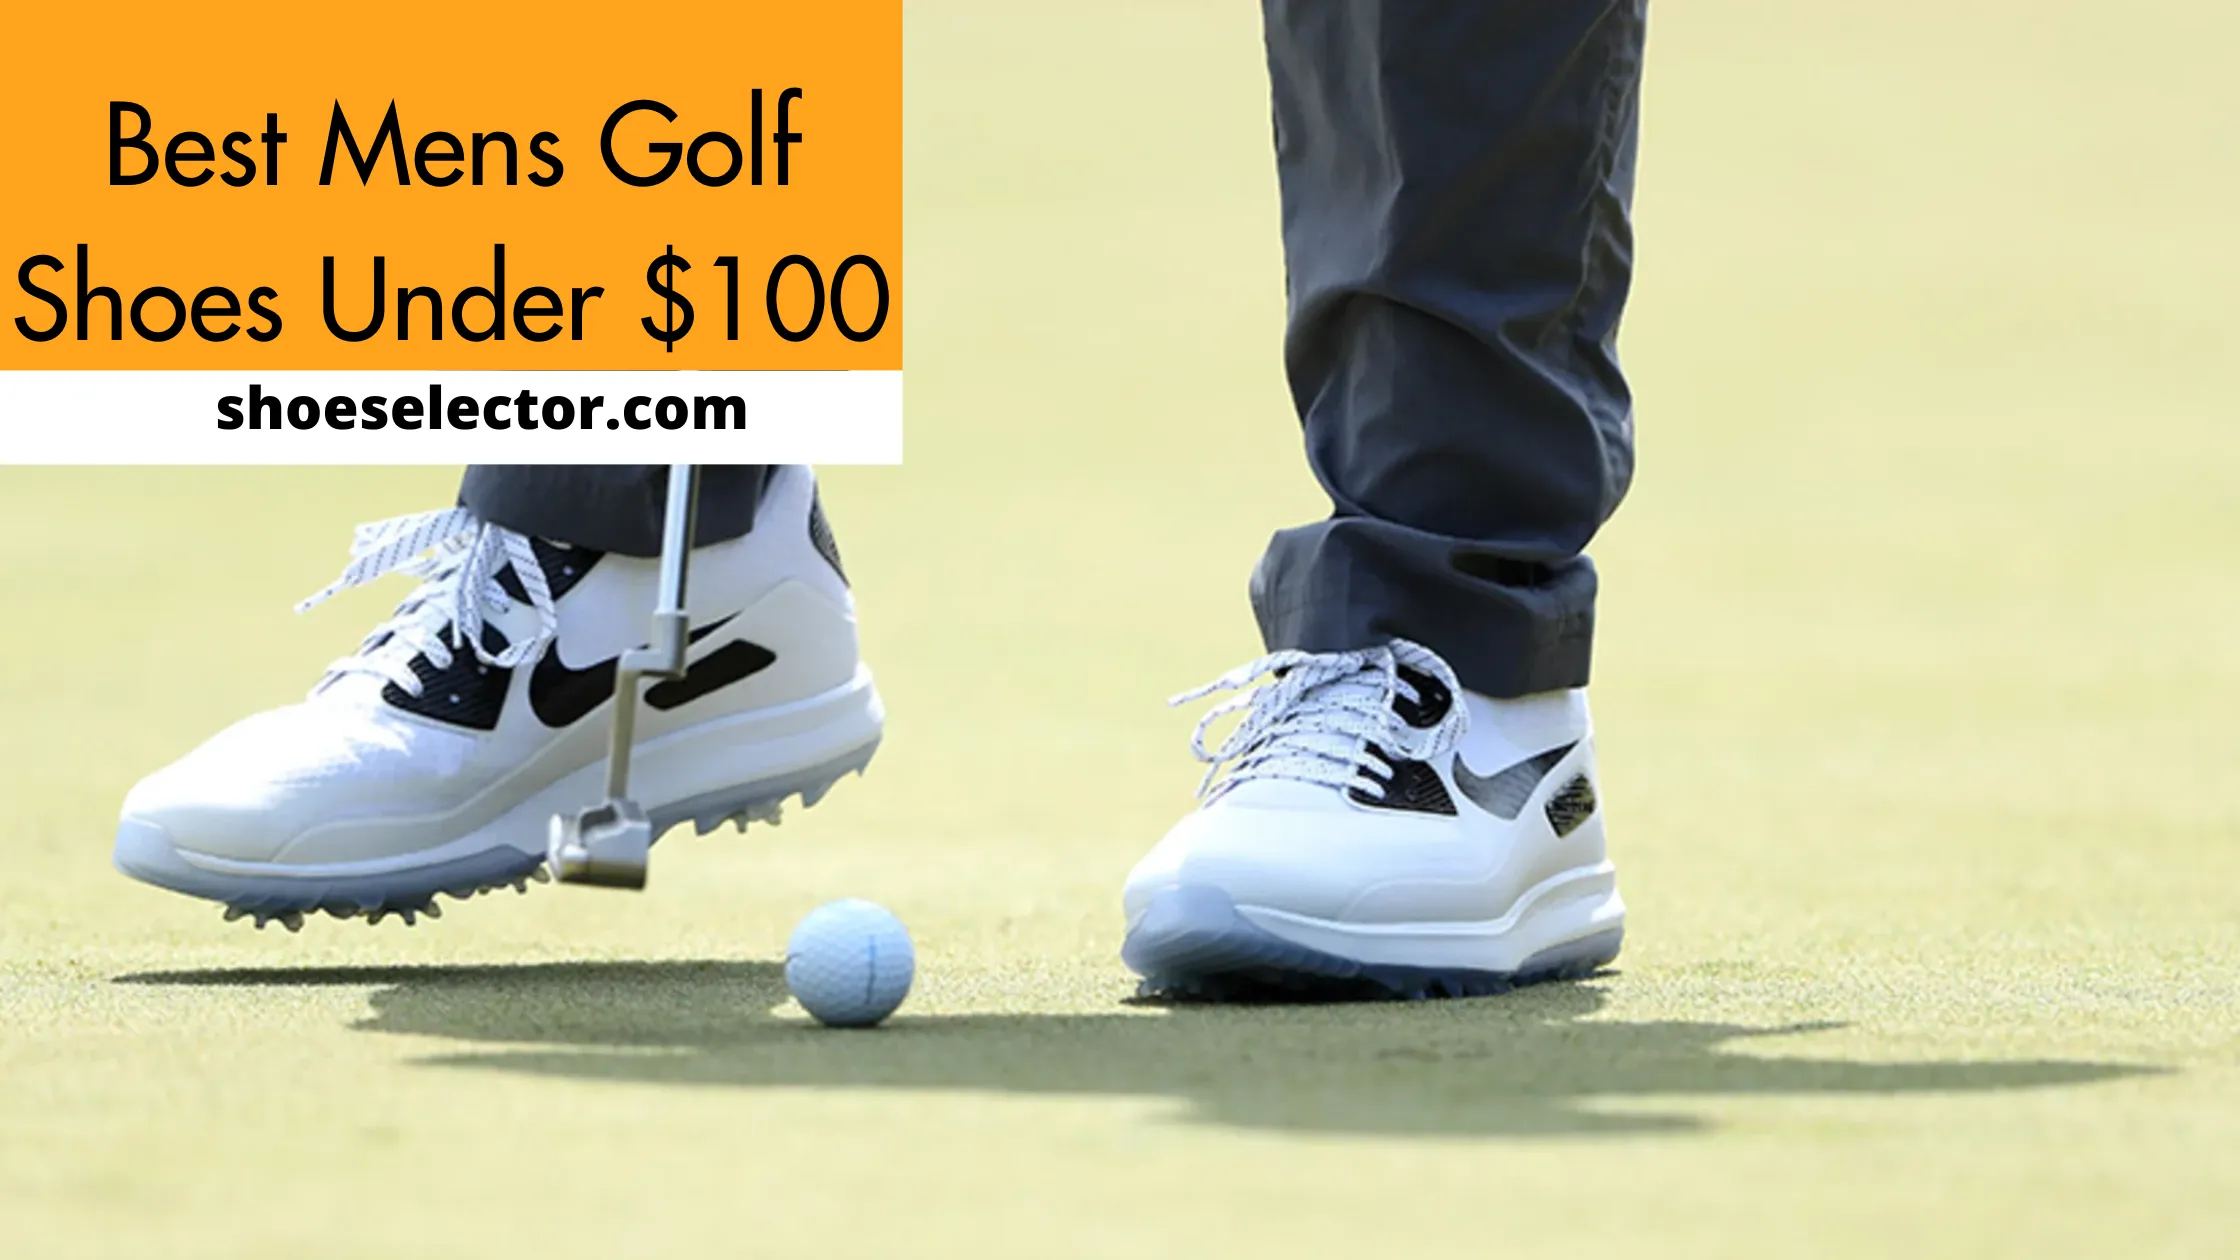 Best Mens Golf Shoes Under $100 - Recommended Guide